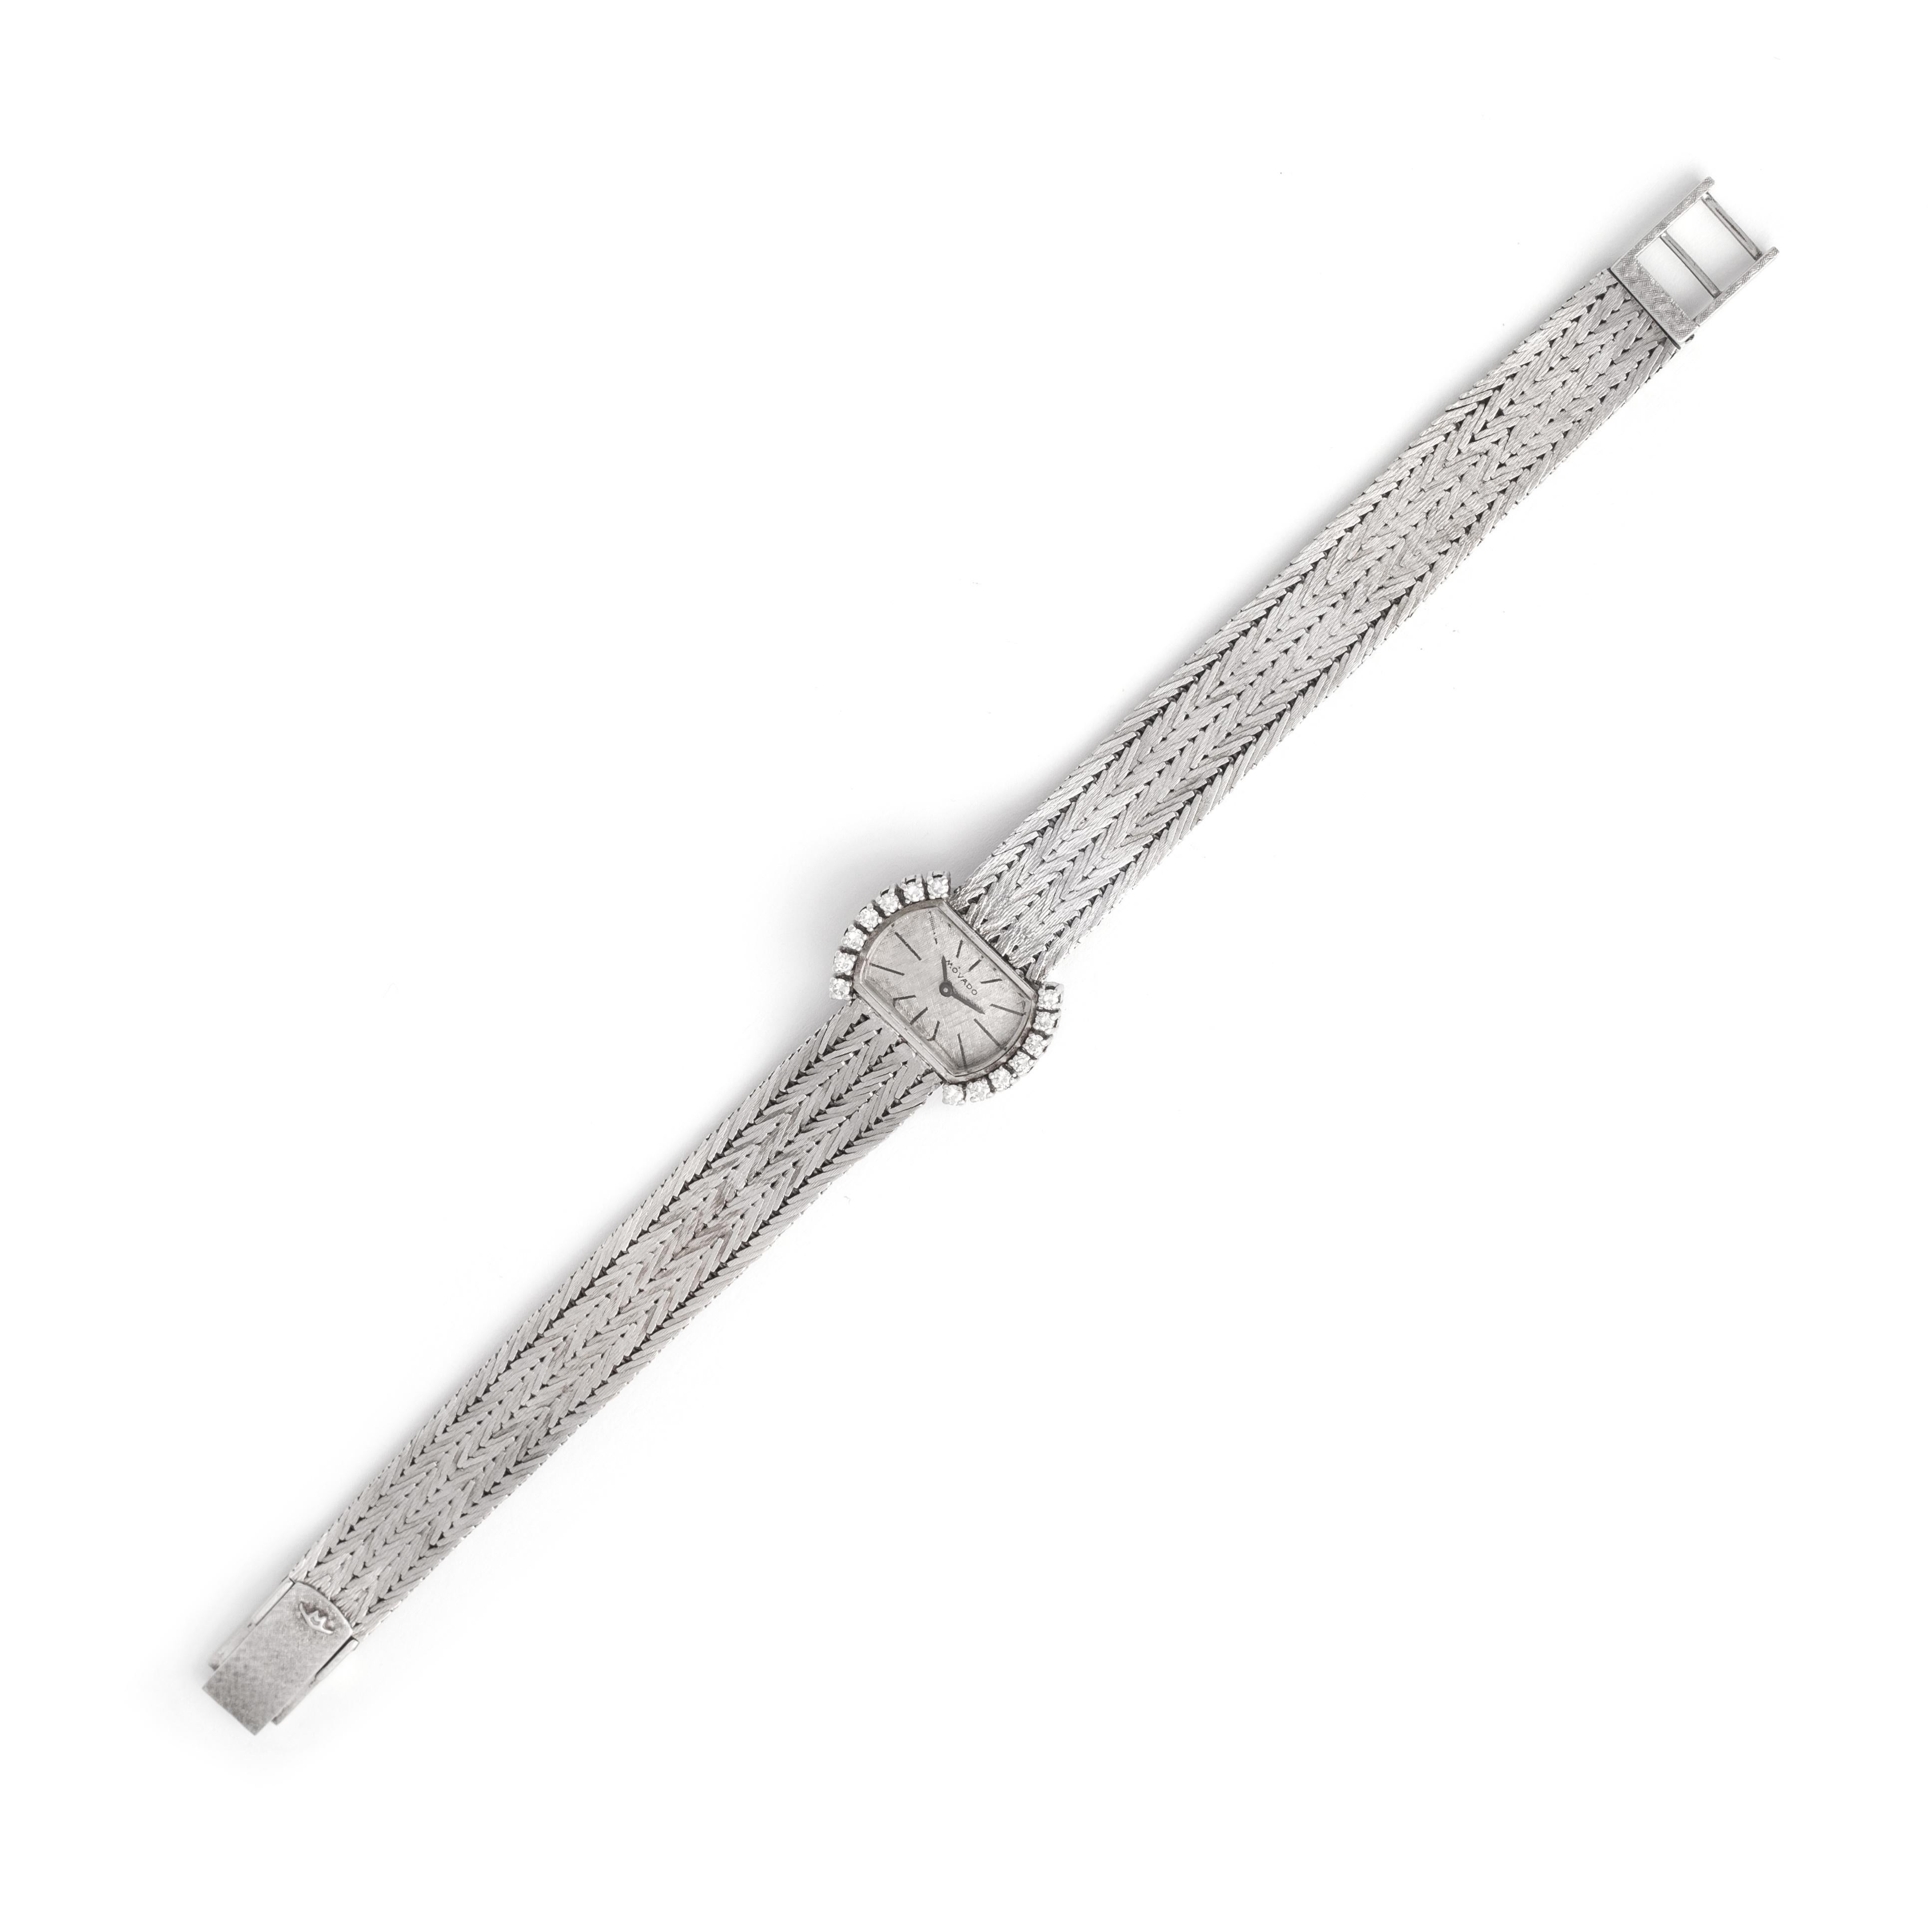 Movado Diamond White Gold Wristwatch.
Circa 1970.
Wrist length: approx. 18.00 centimeters.
Case dimensions: 1.70 x 0.90 centimeters.
Weight: 31.88 grams.

We do not guarantee the movement is working.